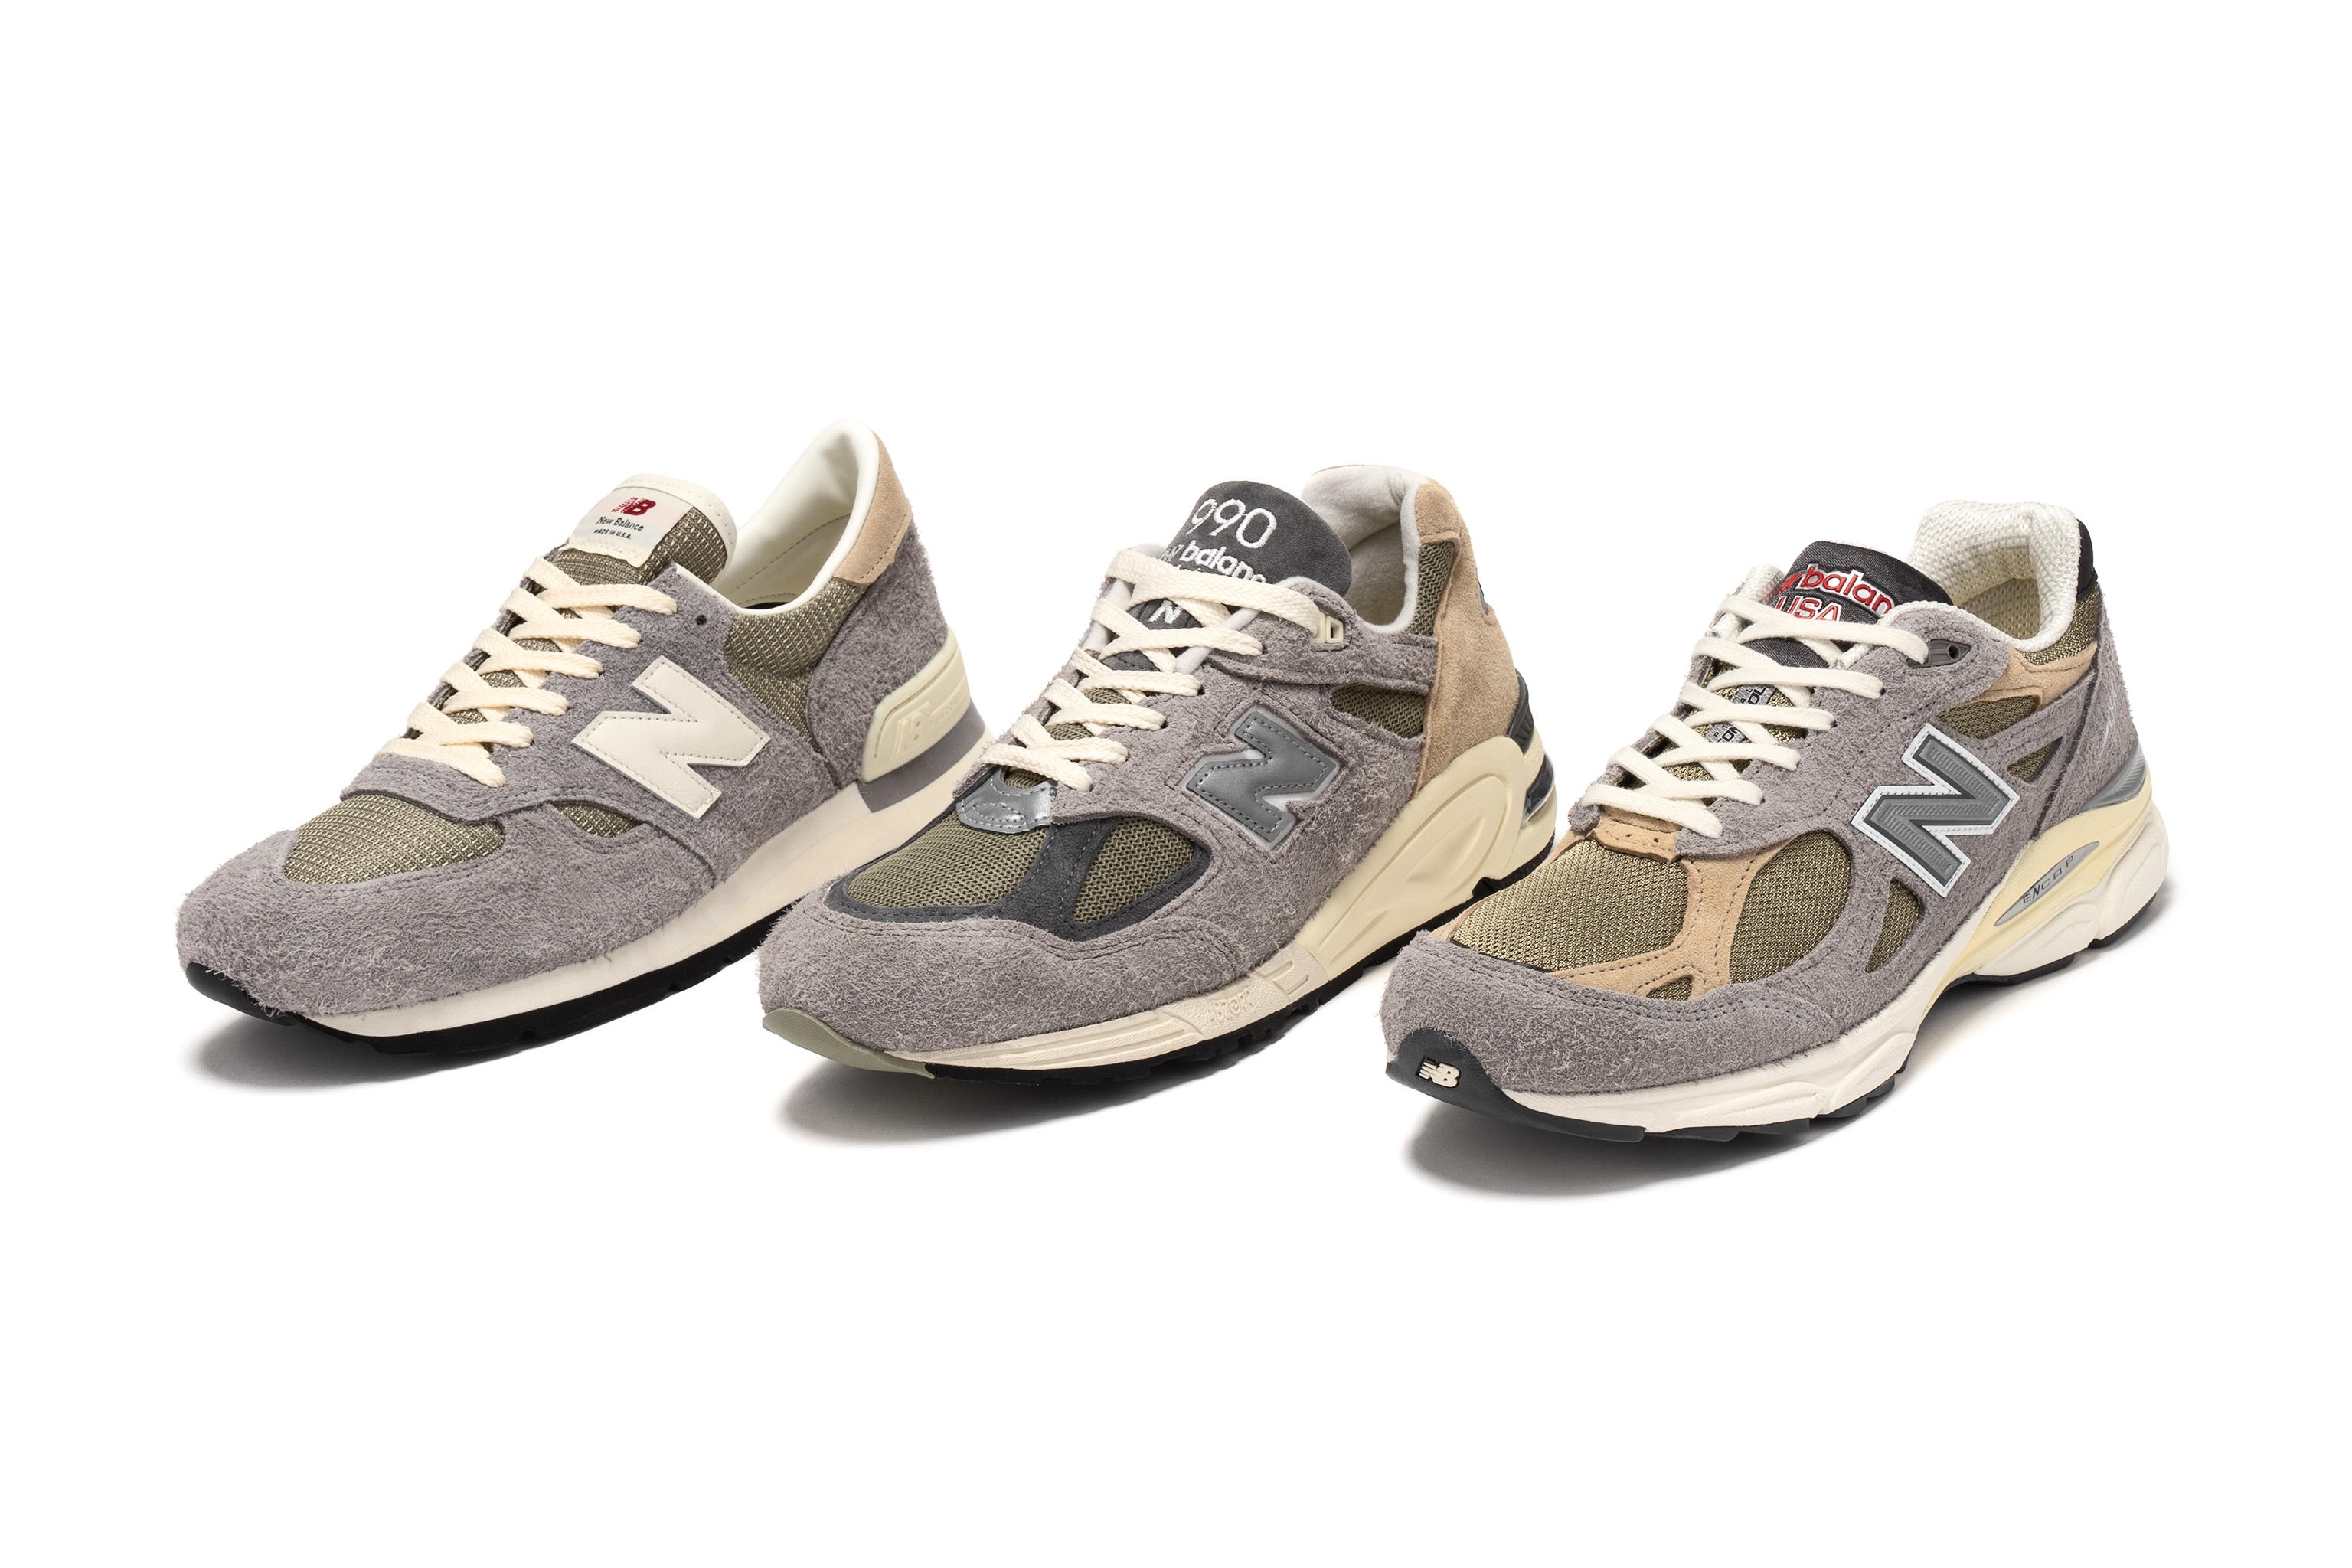 New Balance x Santis in USA Collection | Release Date: 04.28.22 | HAVEN